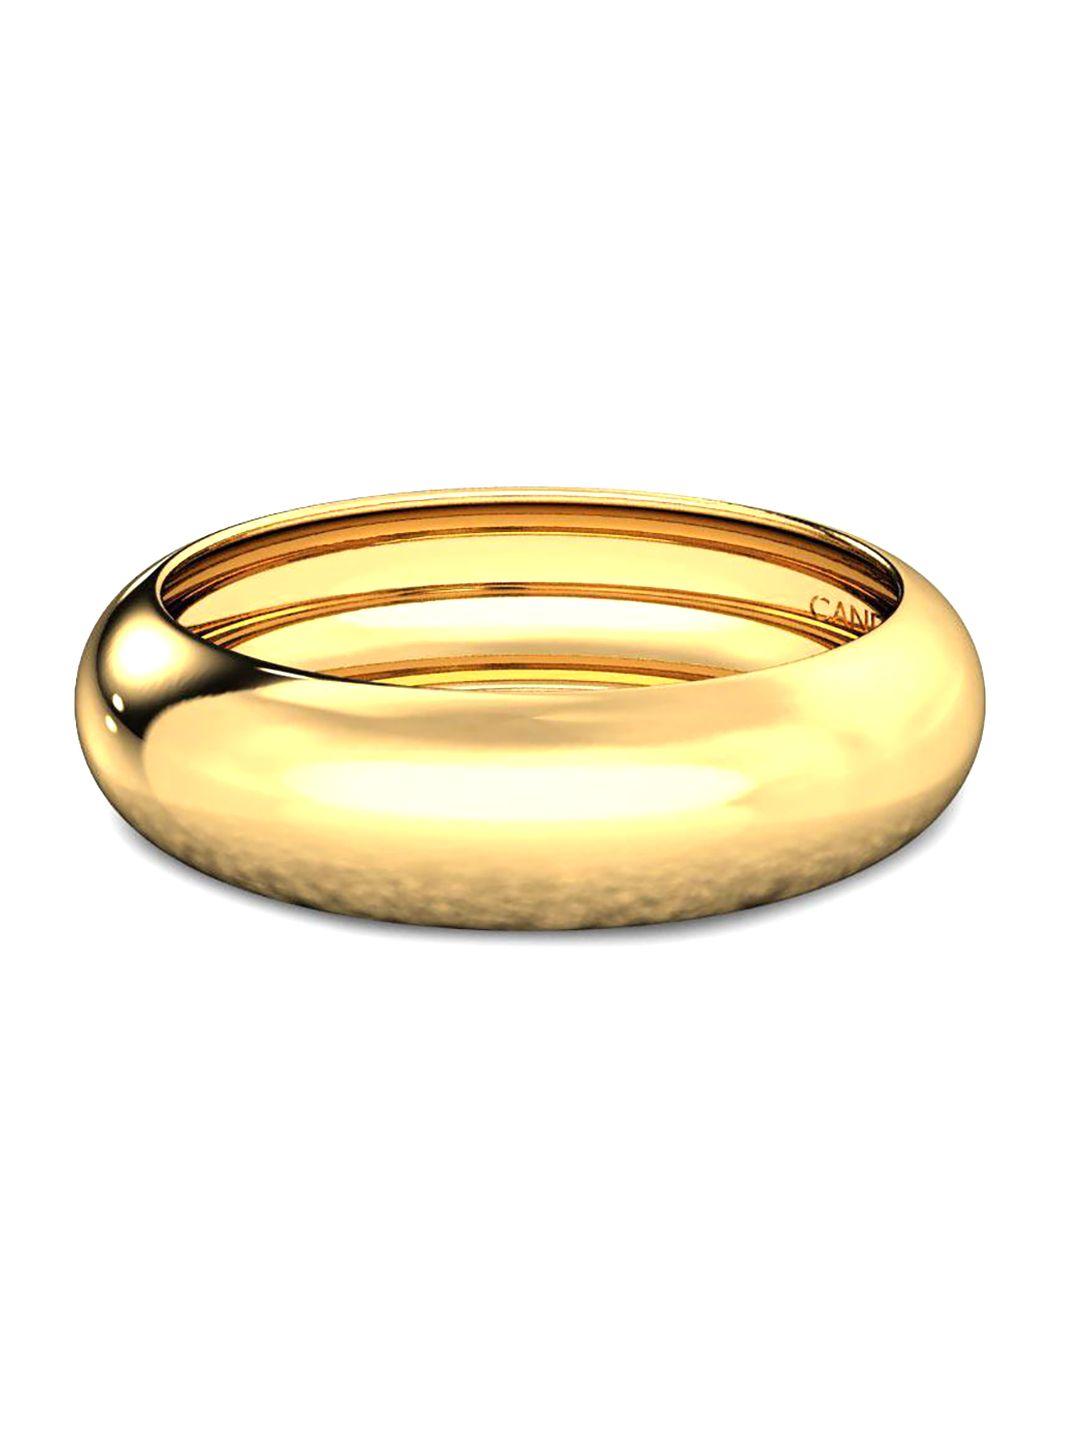 CANDERE A KALYAN JEWELLERS COMPANY 18KT Gold Ring-1.73gm